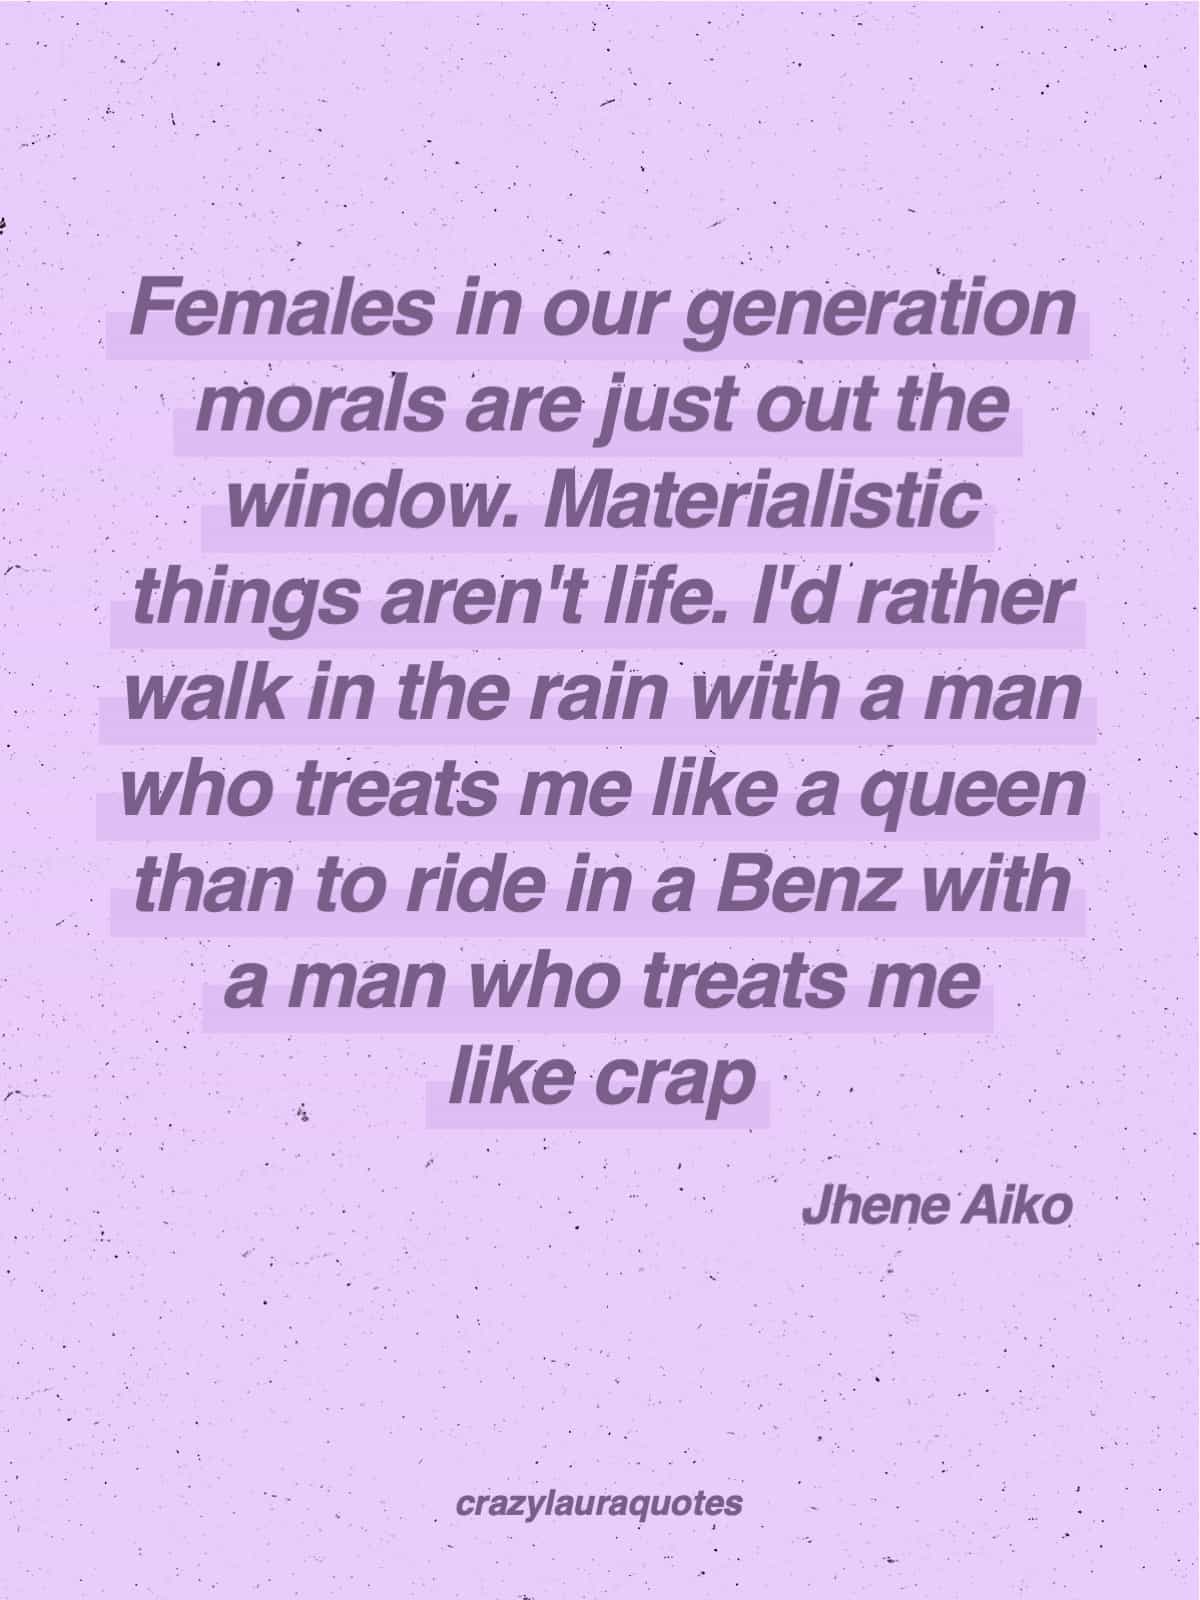 self worth quote from jhene aiko